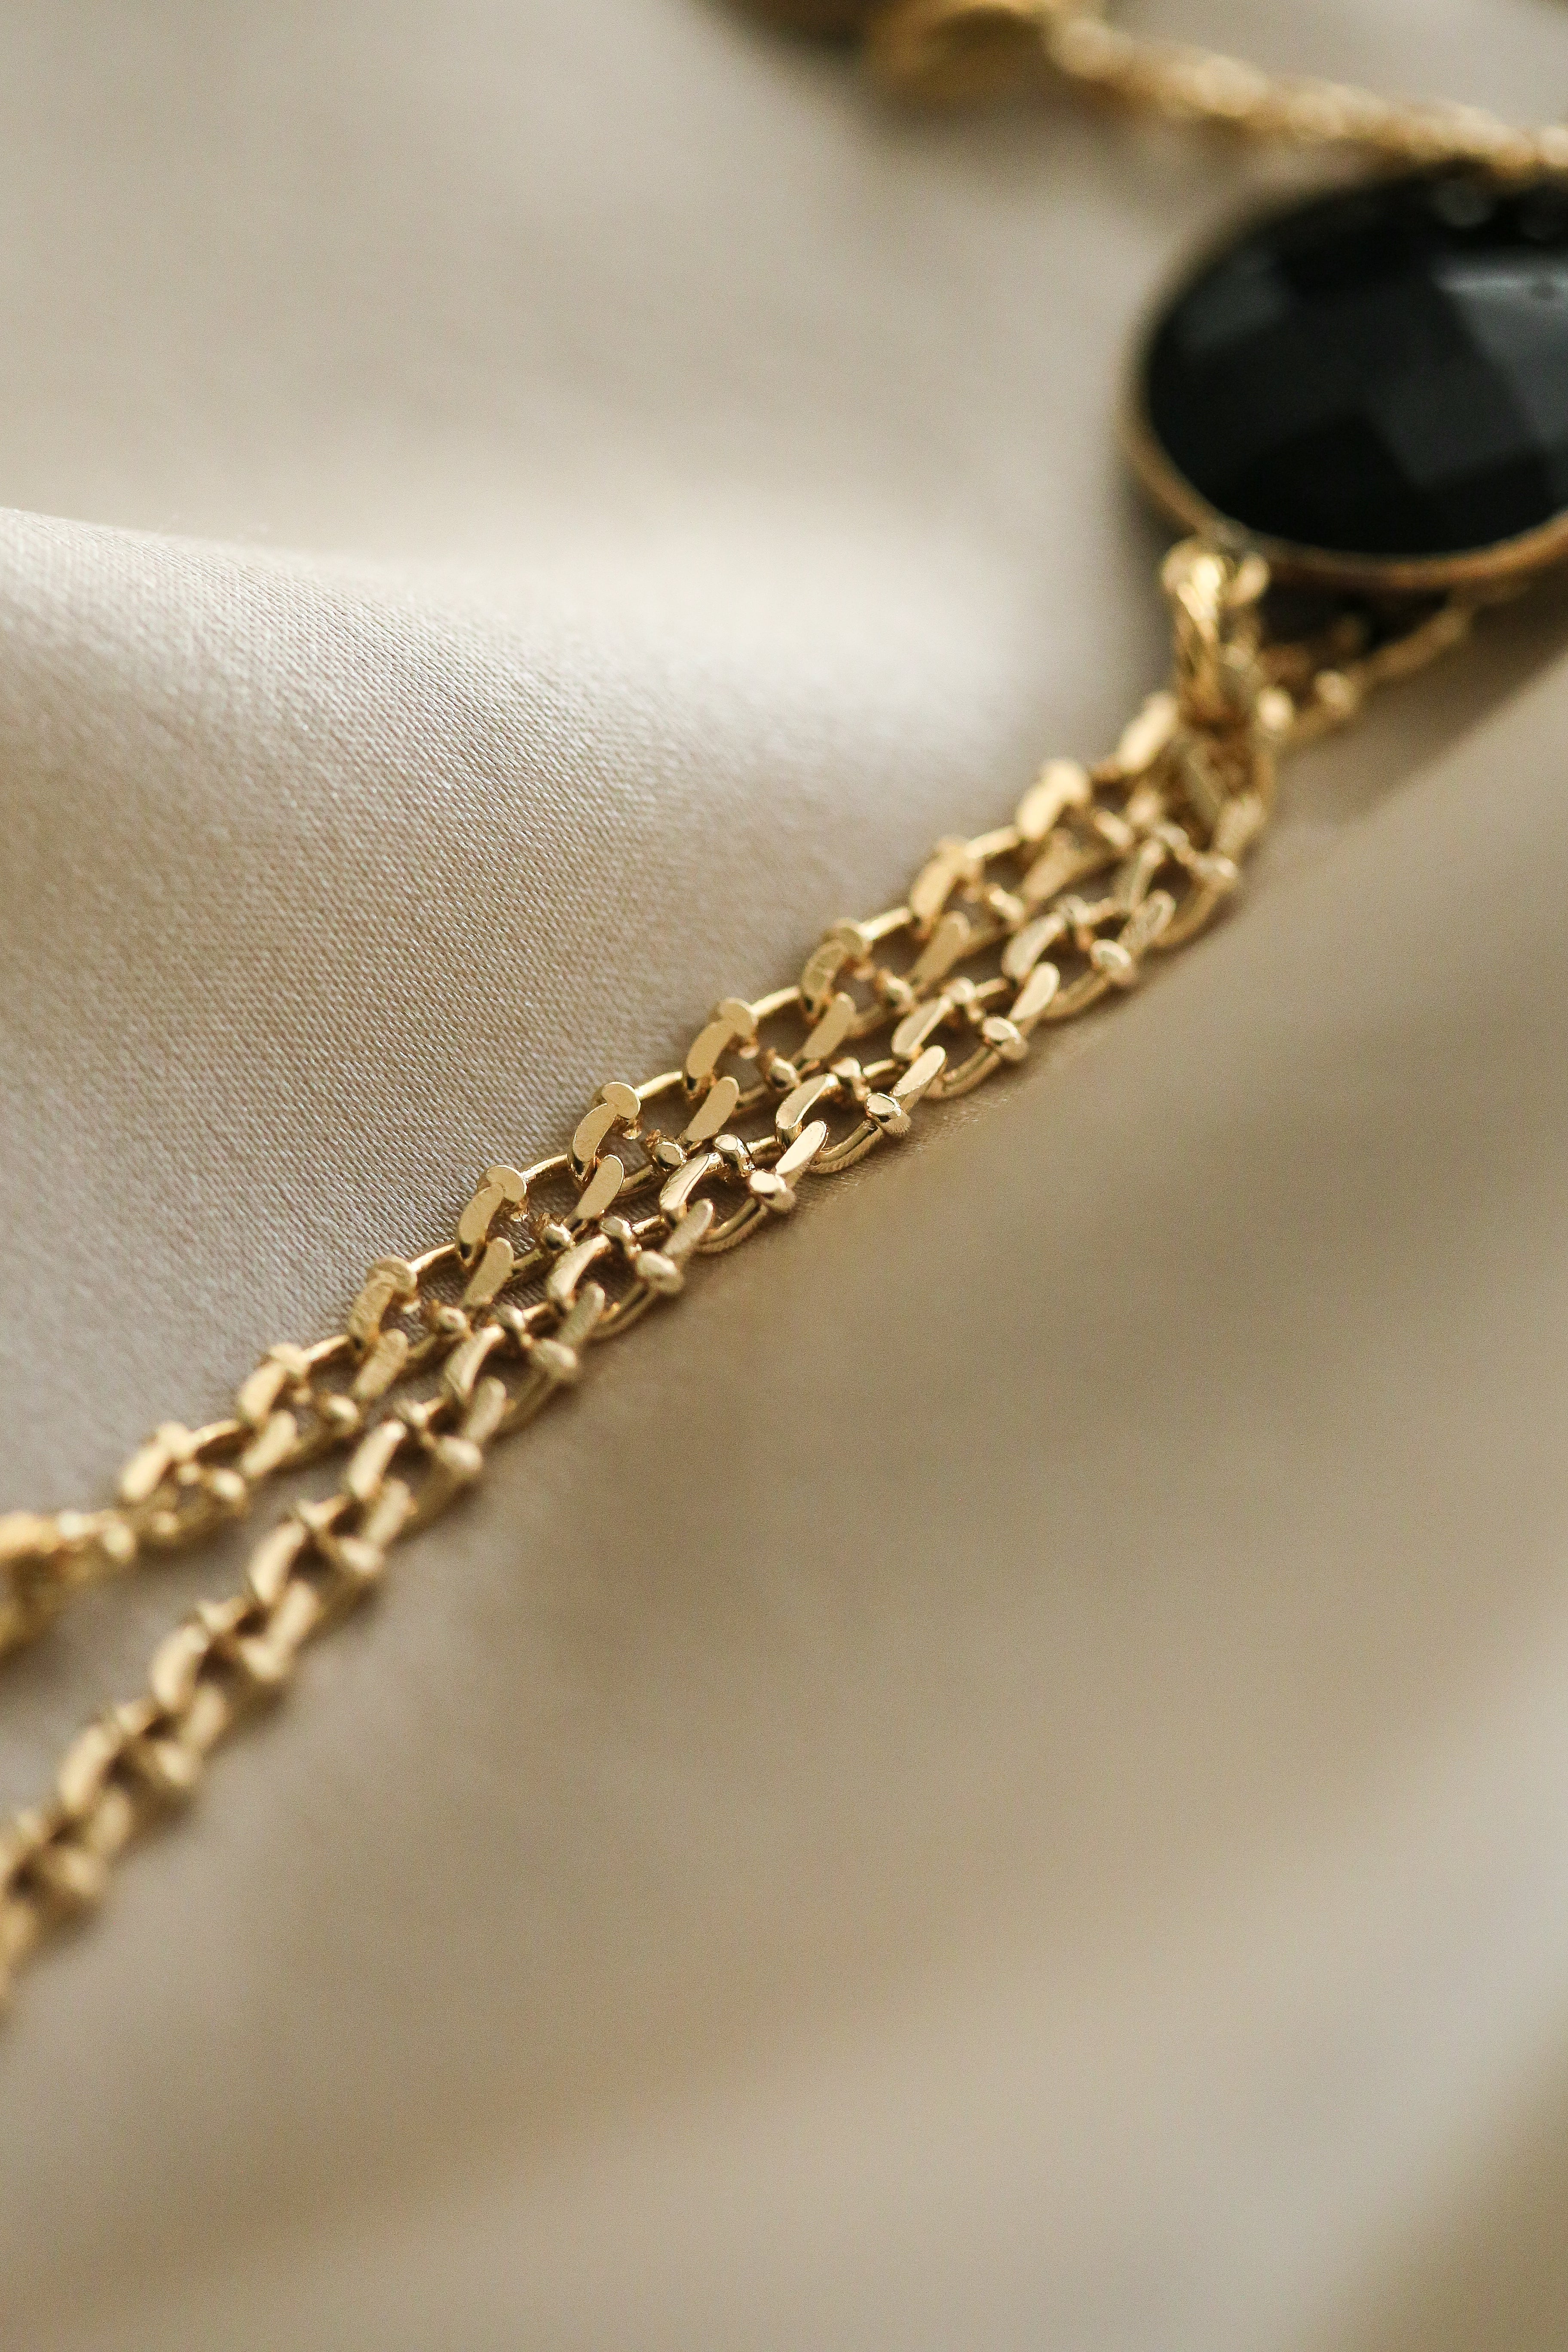 Olivia (Vintage) Necklace - Boutique Minimaliste has waterproof, durable, elegant and vintage inspired jewelry